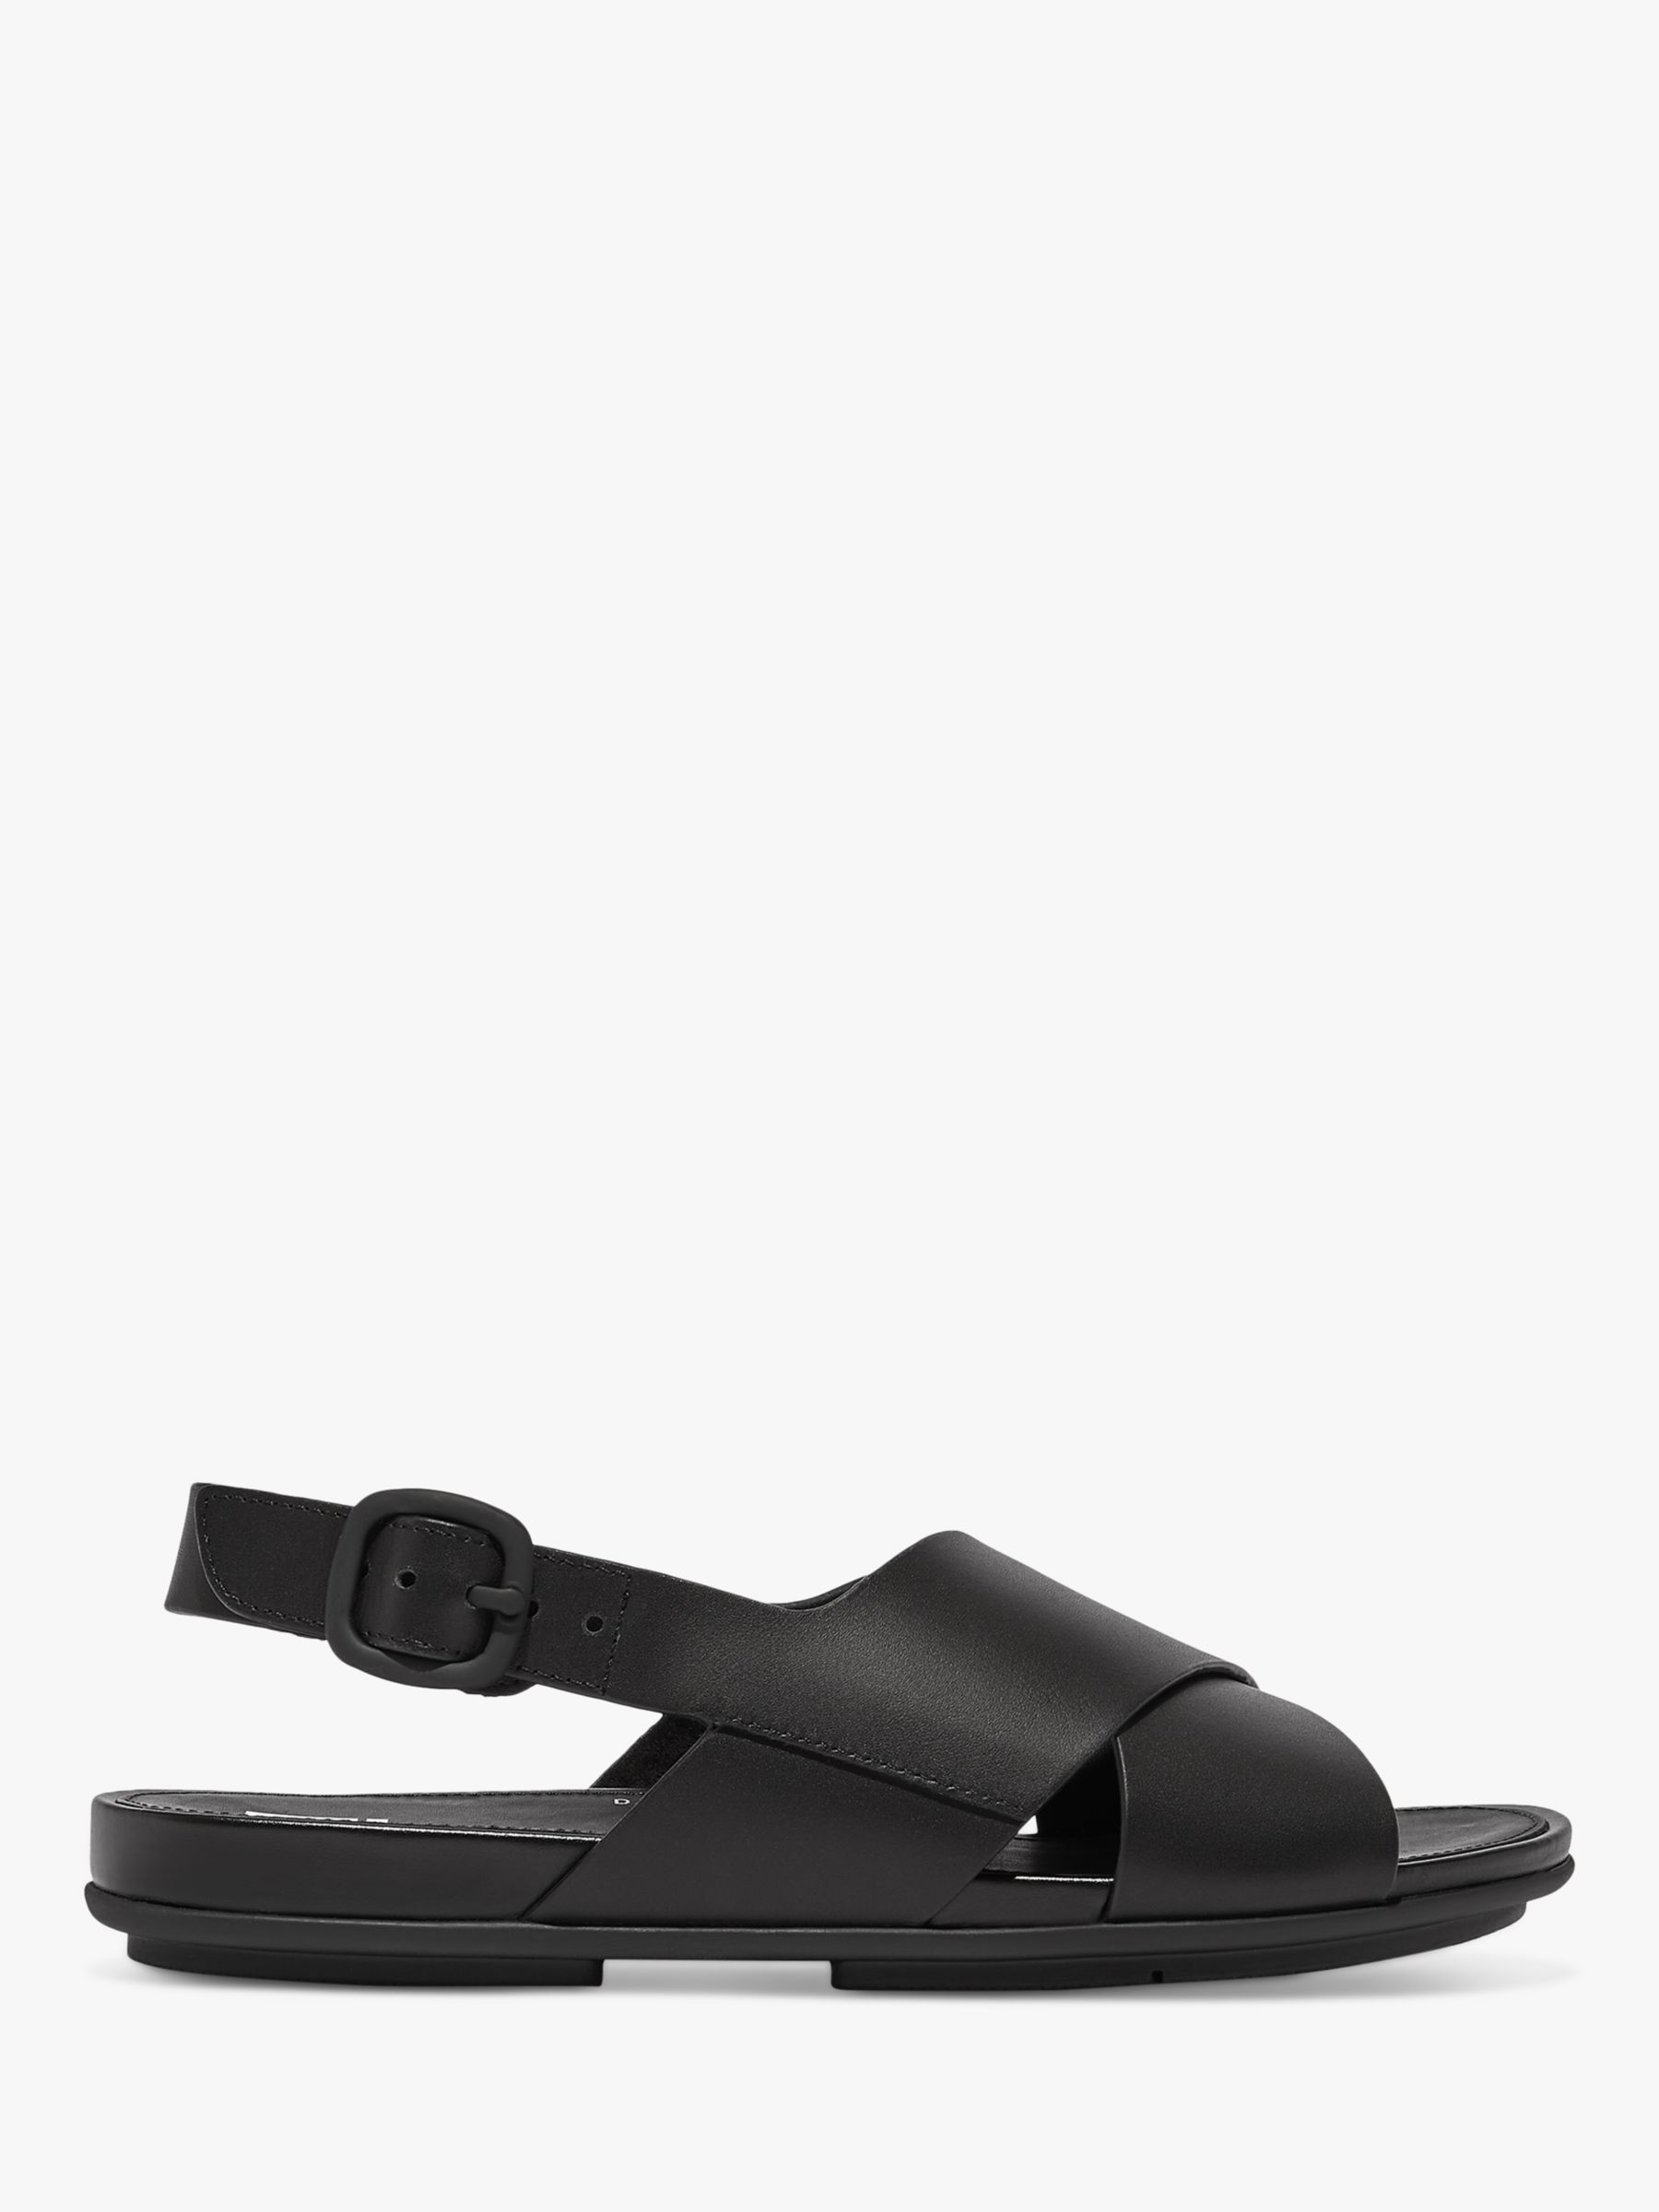 FitFlop Gracie Leather Back Sandals, Black at John Lewis & Partners